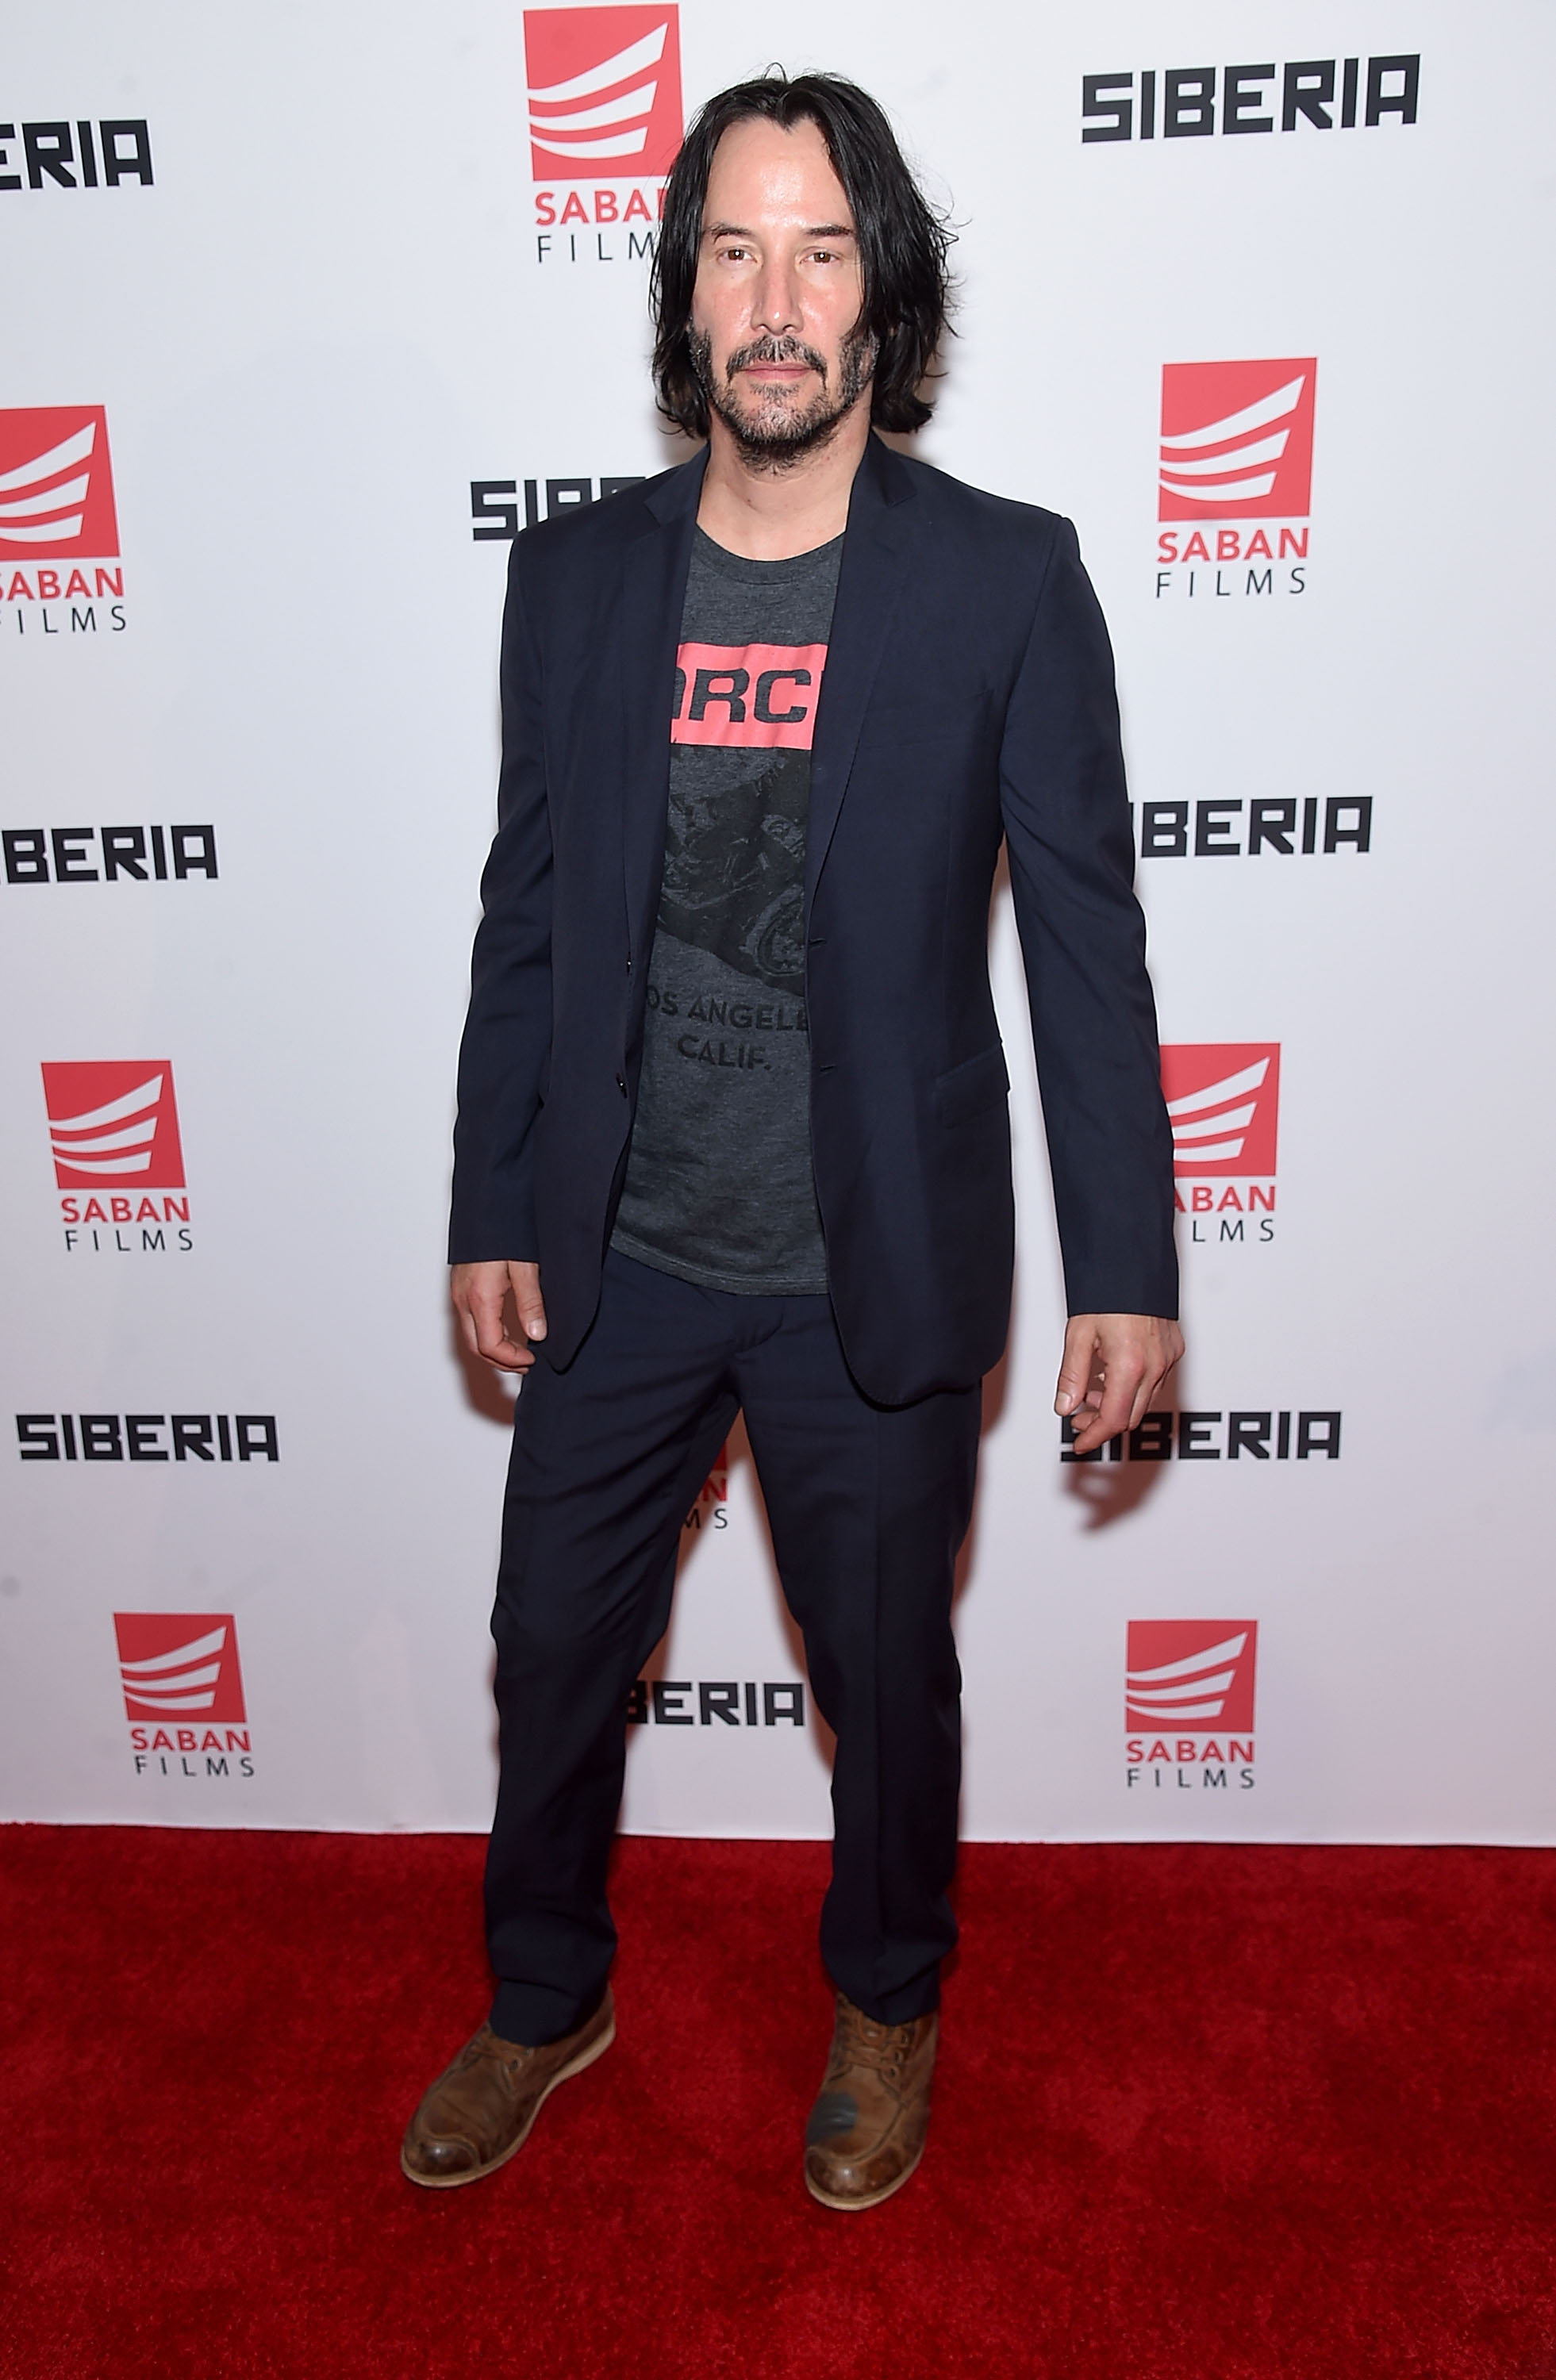 Keanu Reeves at the"Siberia" premiere in New York City, on July 11, 2018. | Source: Getty Images